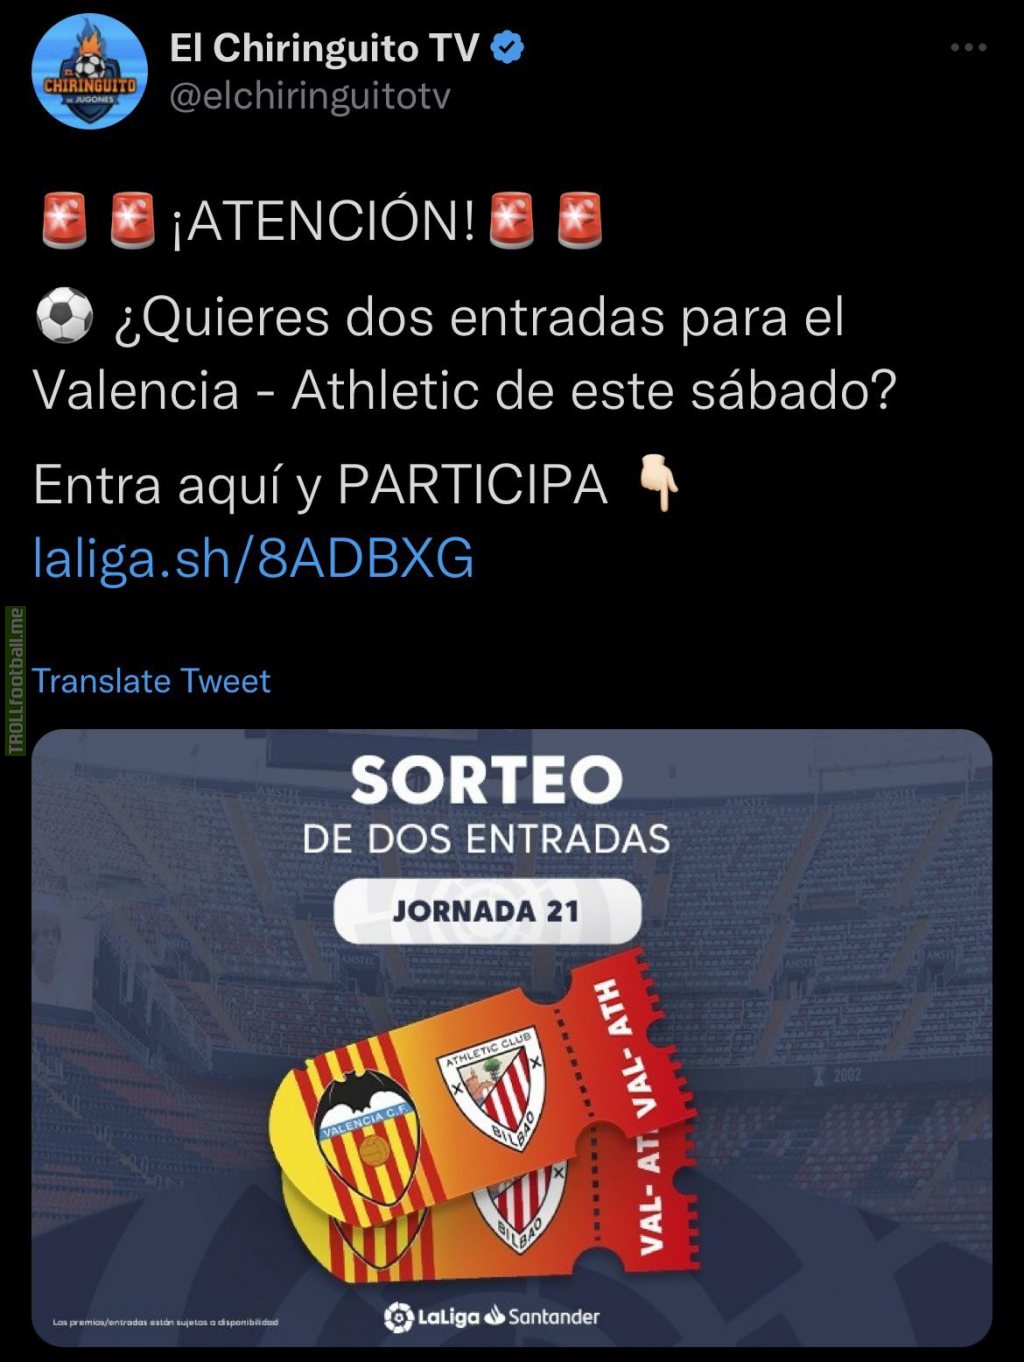 Valencia CF is giving away tickets for the upcoming match against Athletic to national media and schools to counter the protest of Libertad VCF to empty Mestalla.